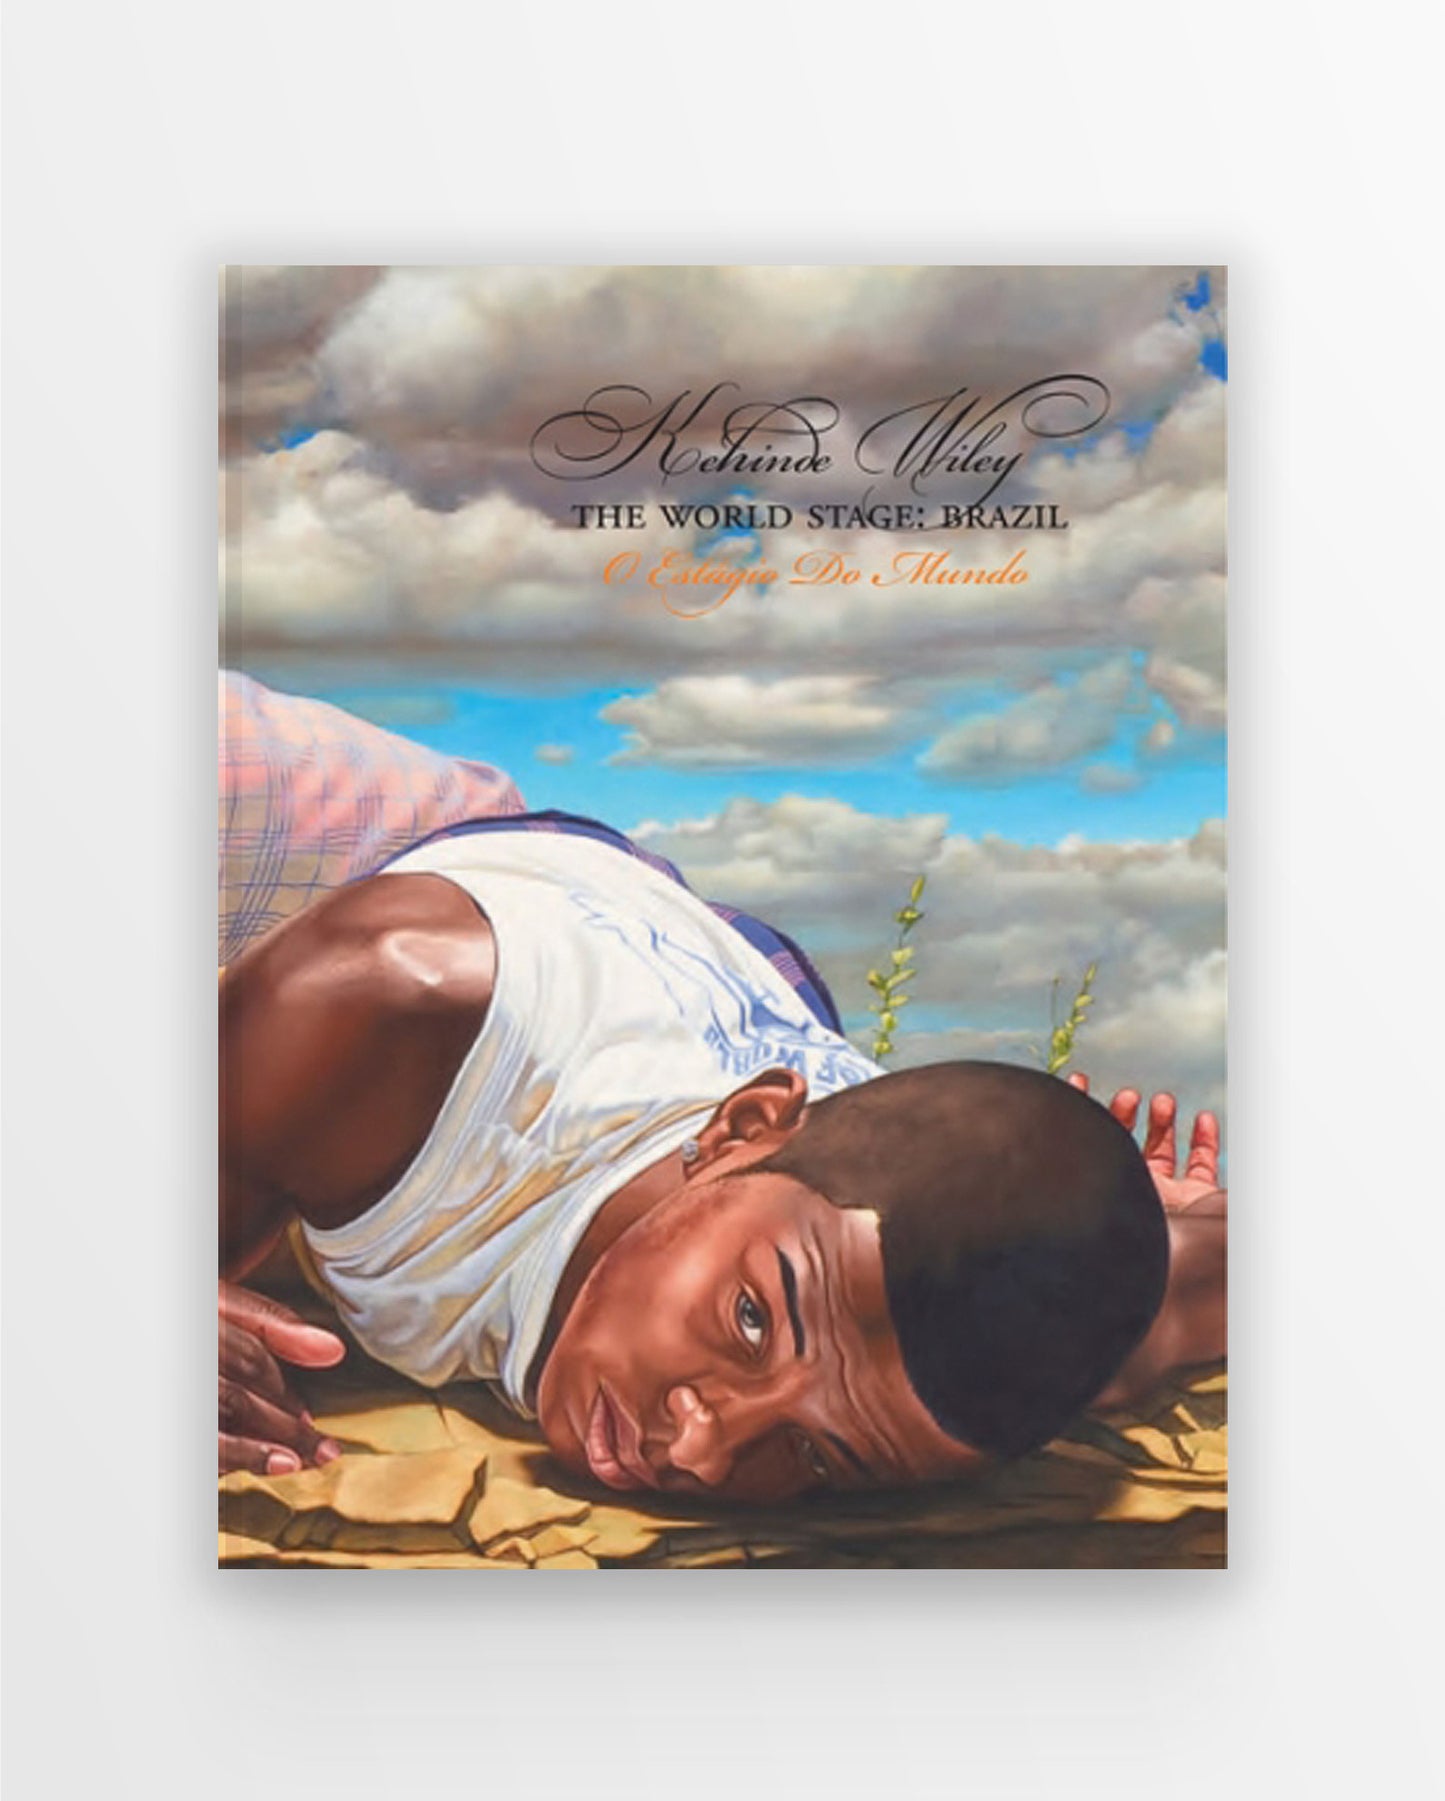 Kehinde Wiley: The World Stage: Brazil